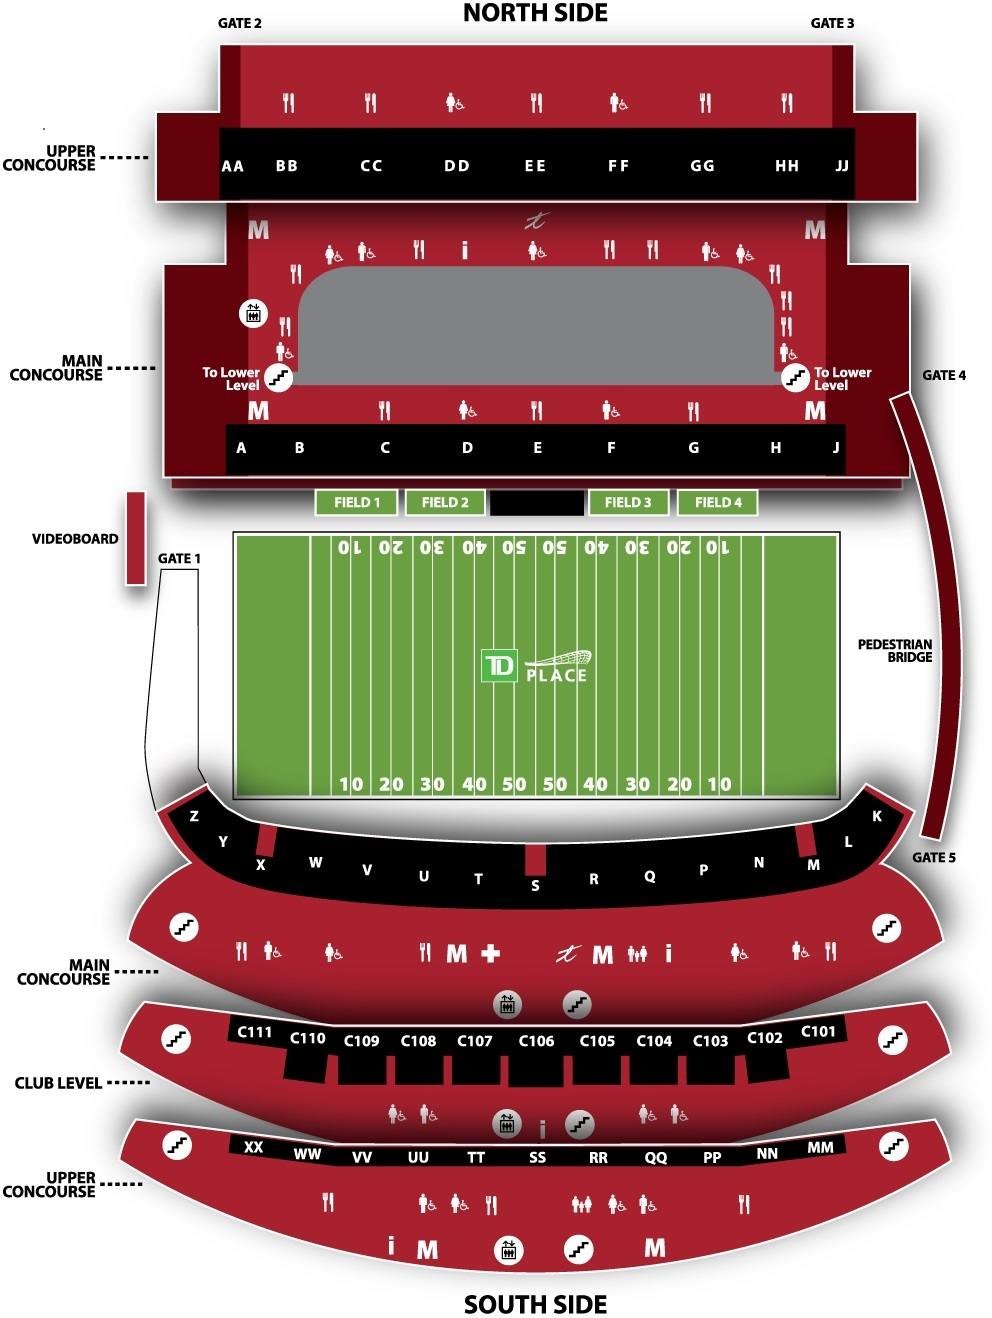 TD Place Stadium Seating Chart with Seat Numbers